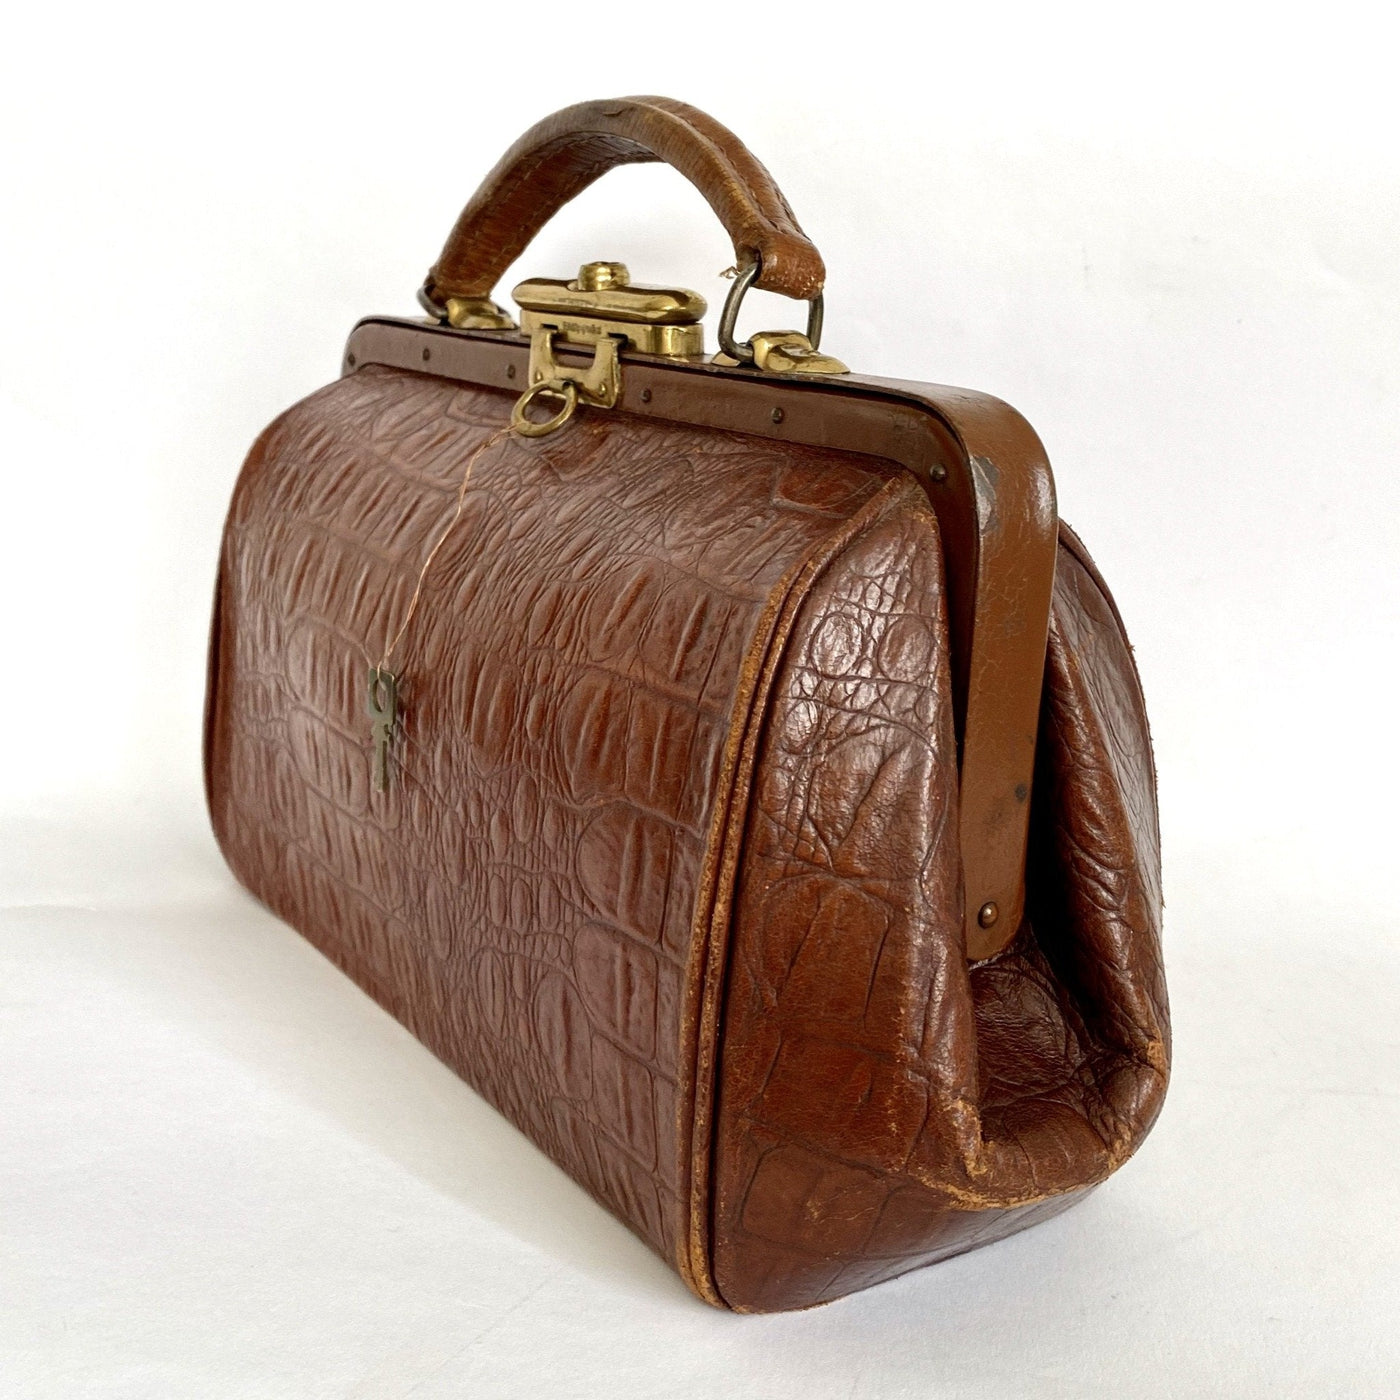 Functional object - Gladstone bag, Ca 1900